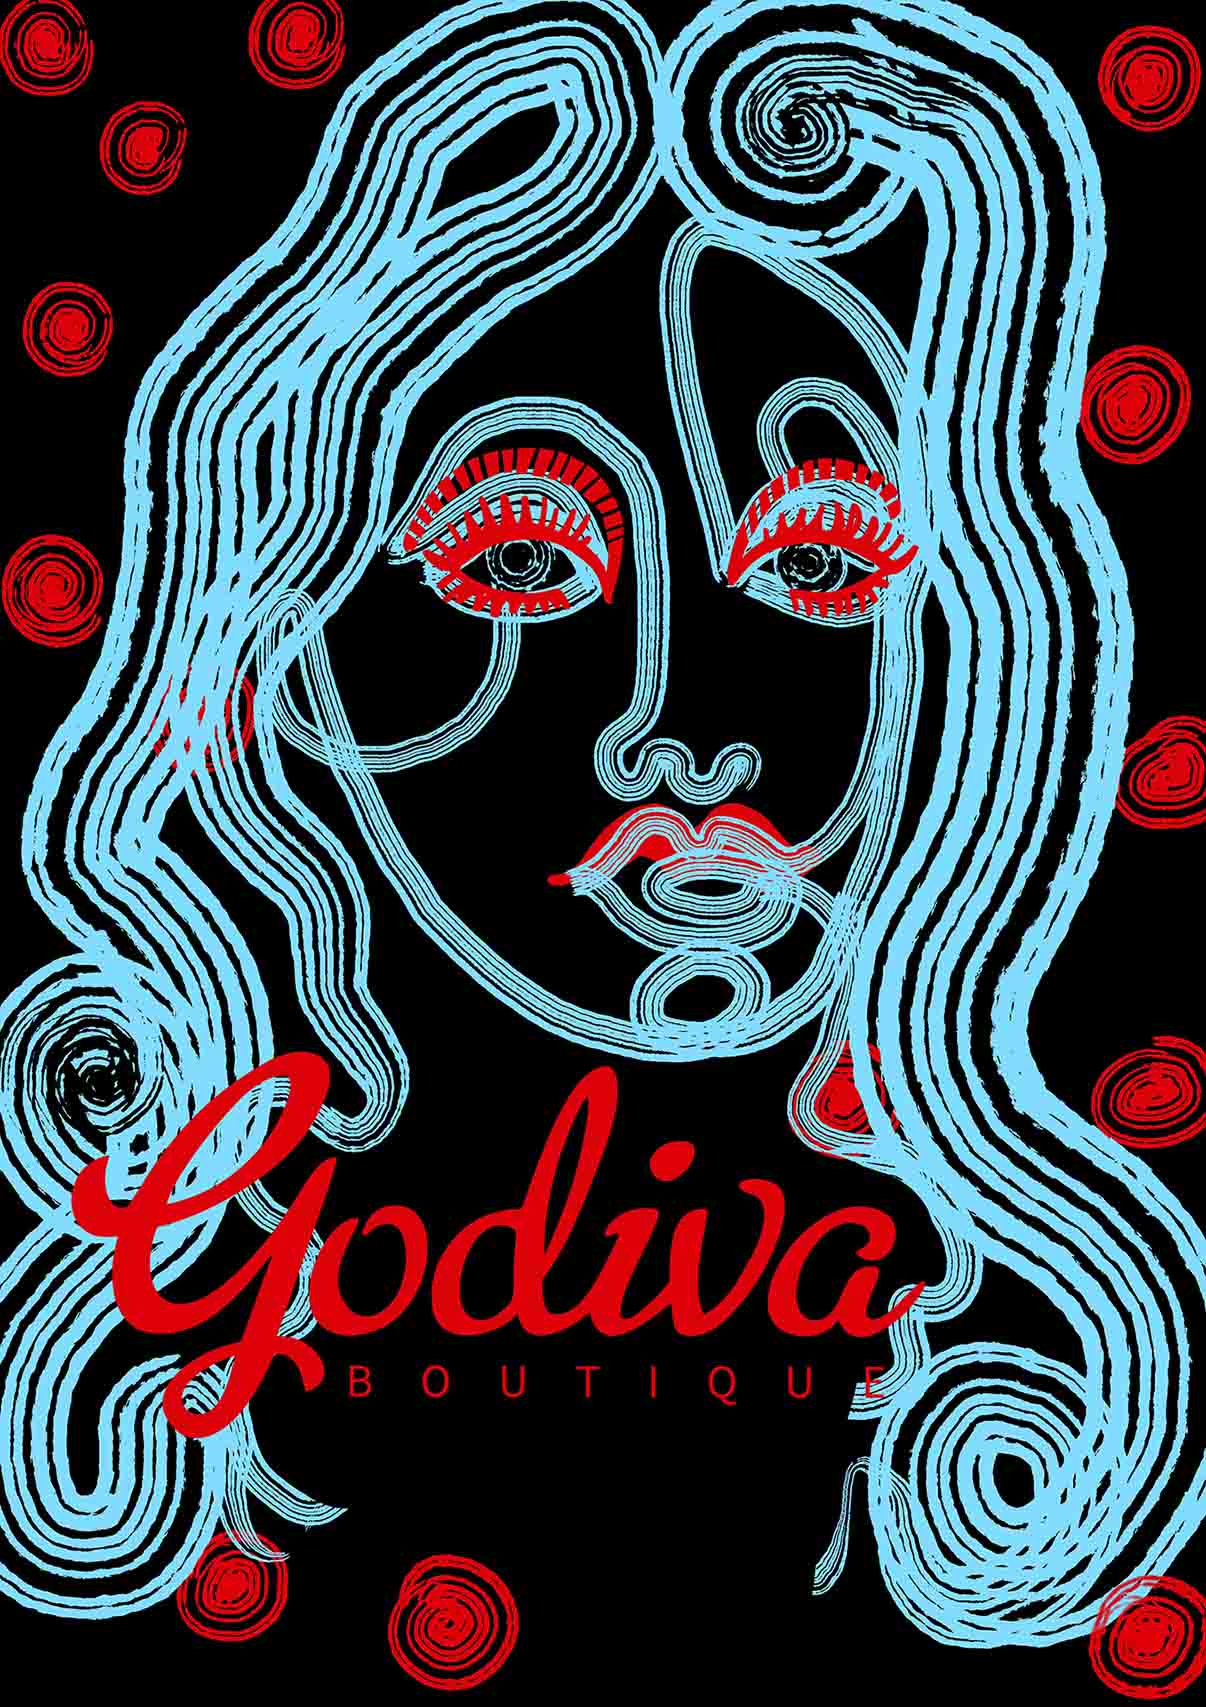 Editorial Illustration for Godiva Vintage. A blue line drawing of a woman face with a black background. Red letters spell out 'Godiva Vintage' beneath